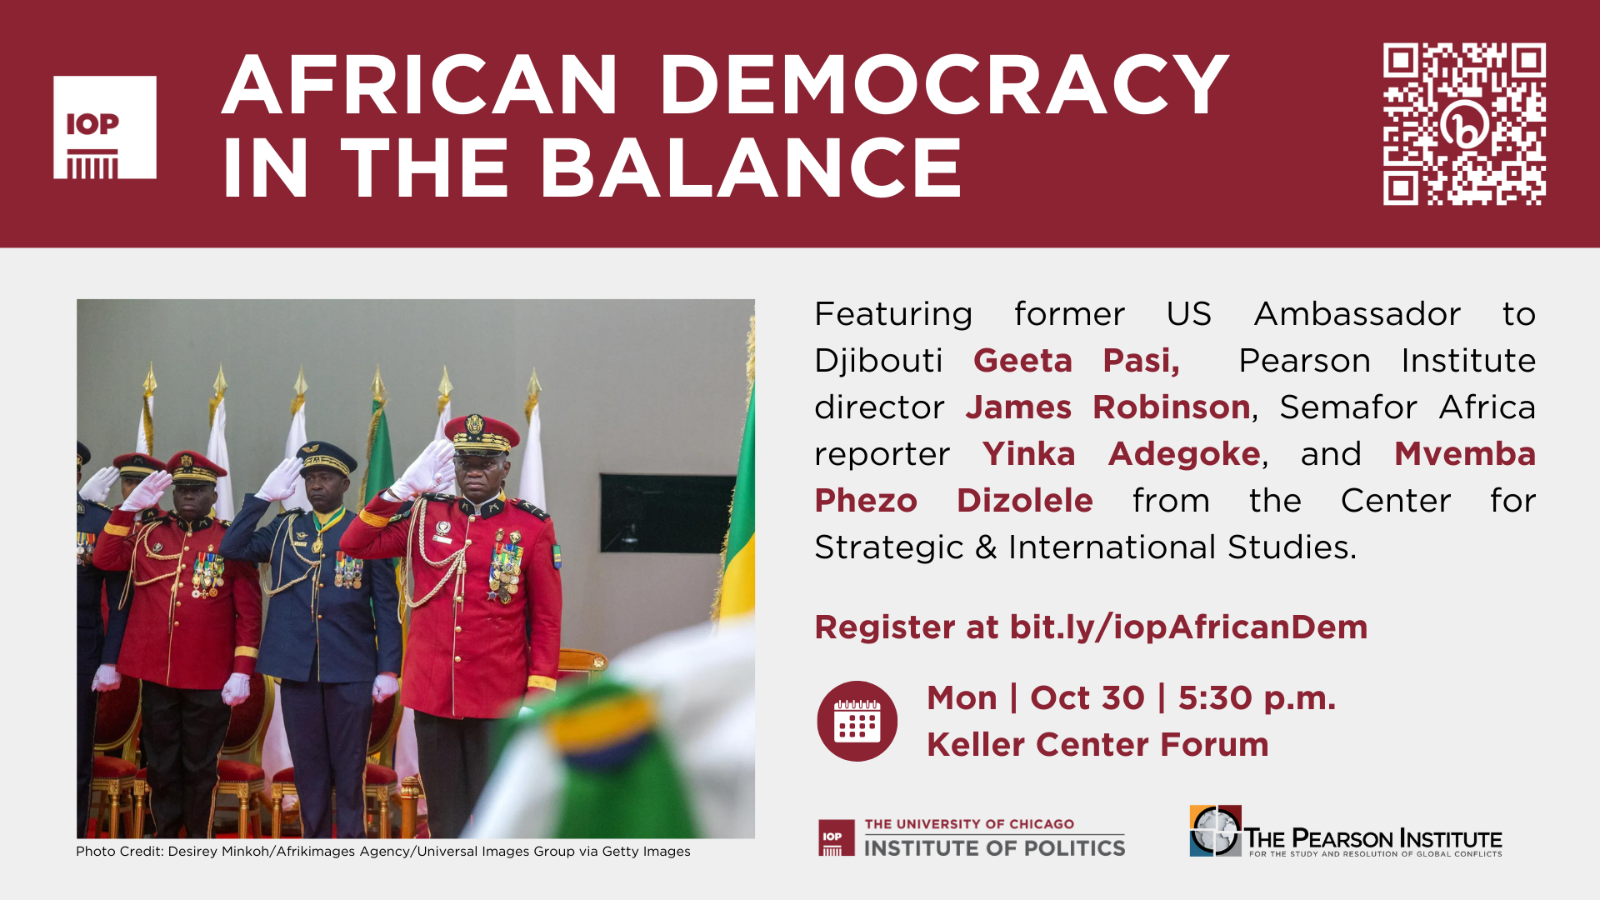 Poster Image for African Democracy in the Balance